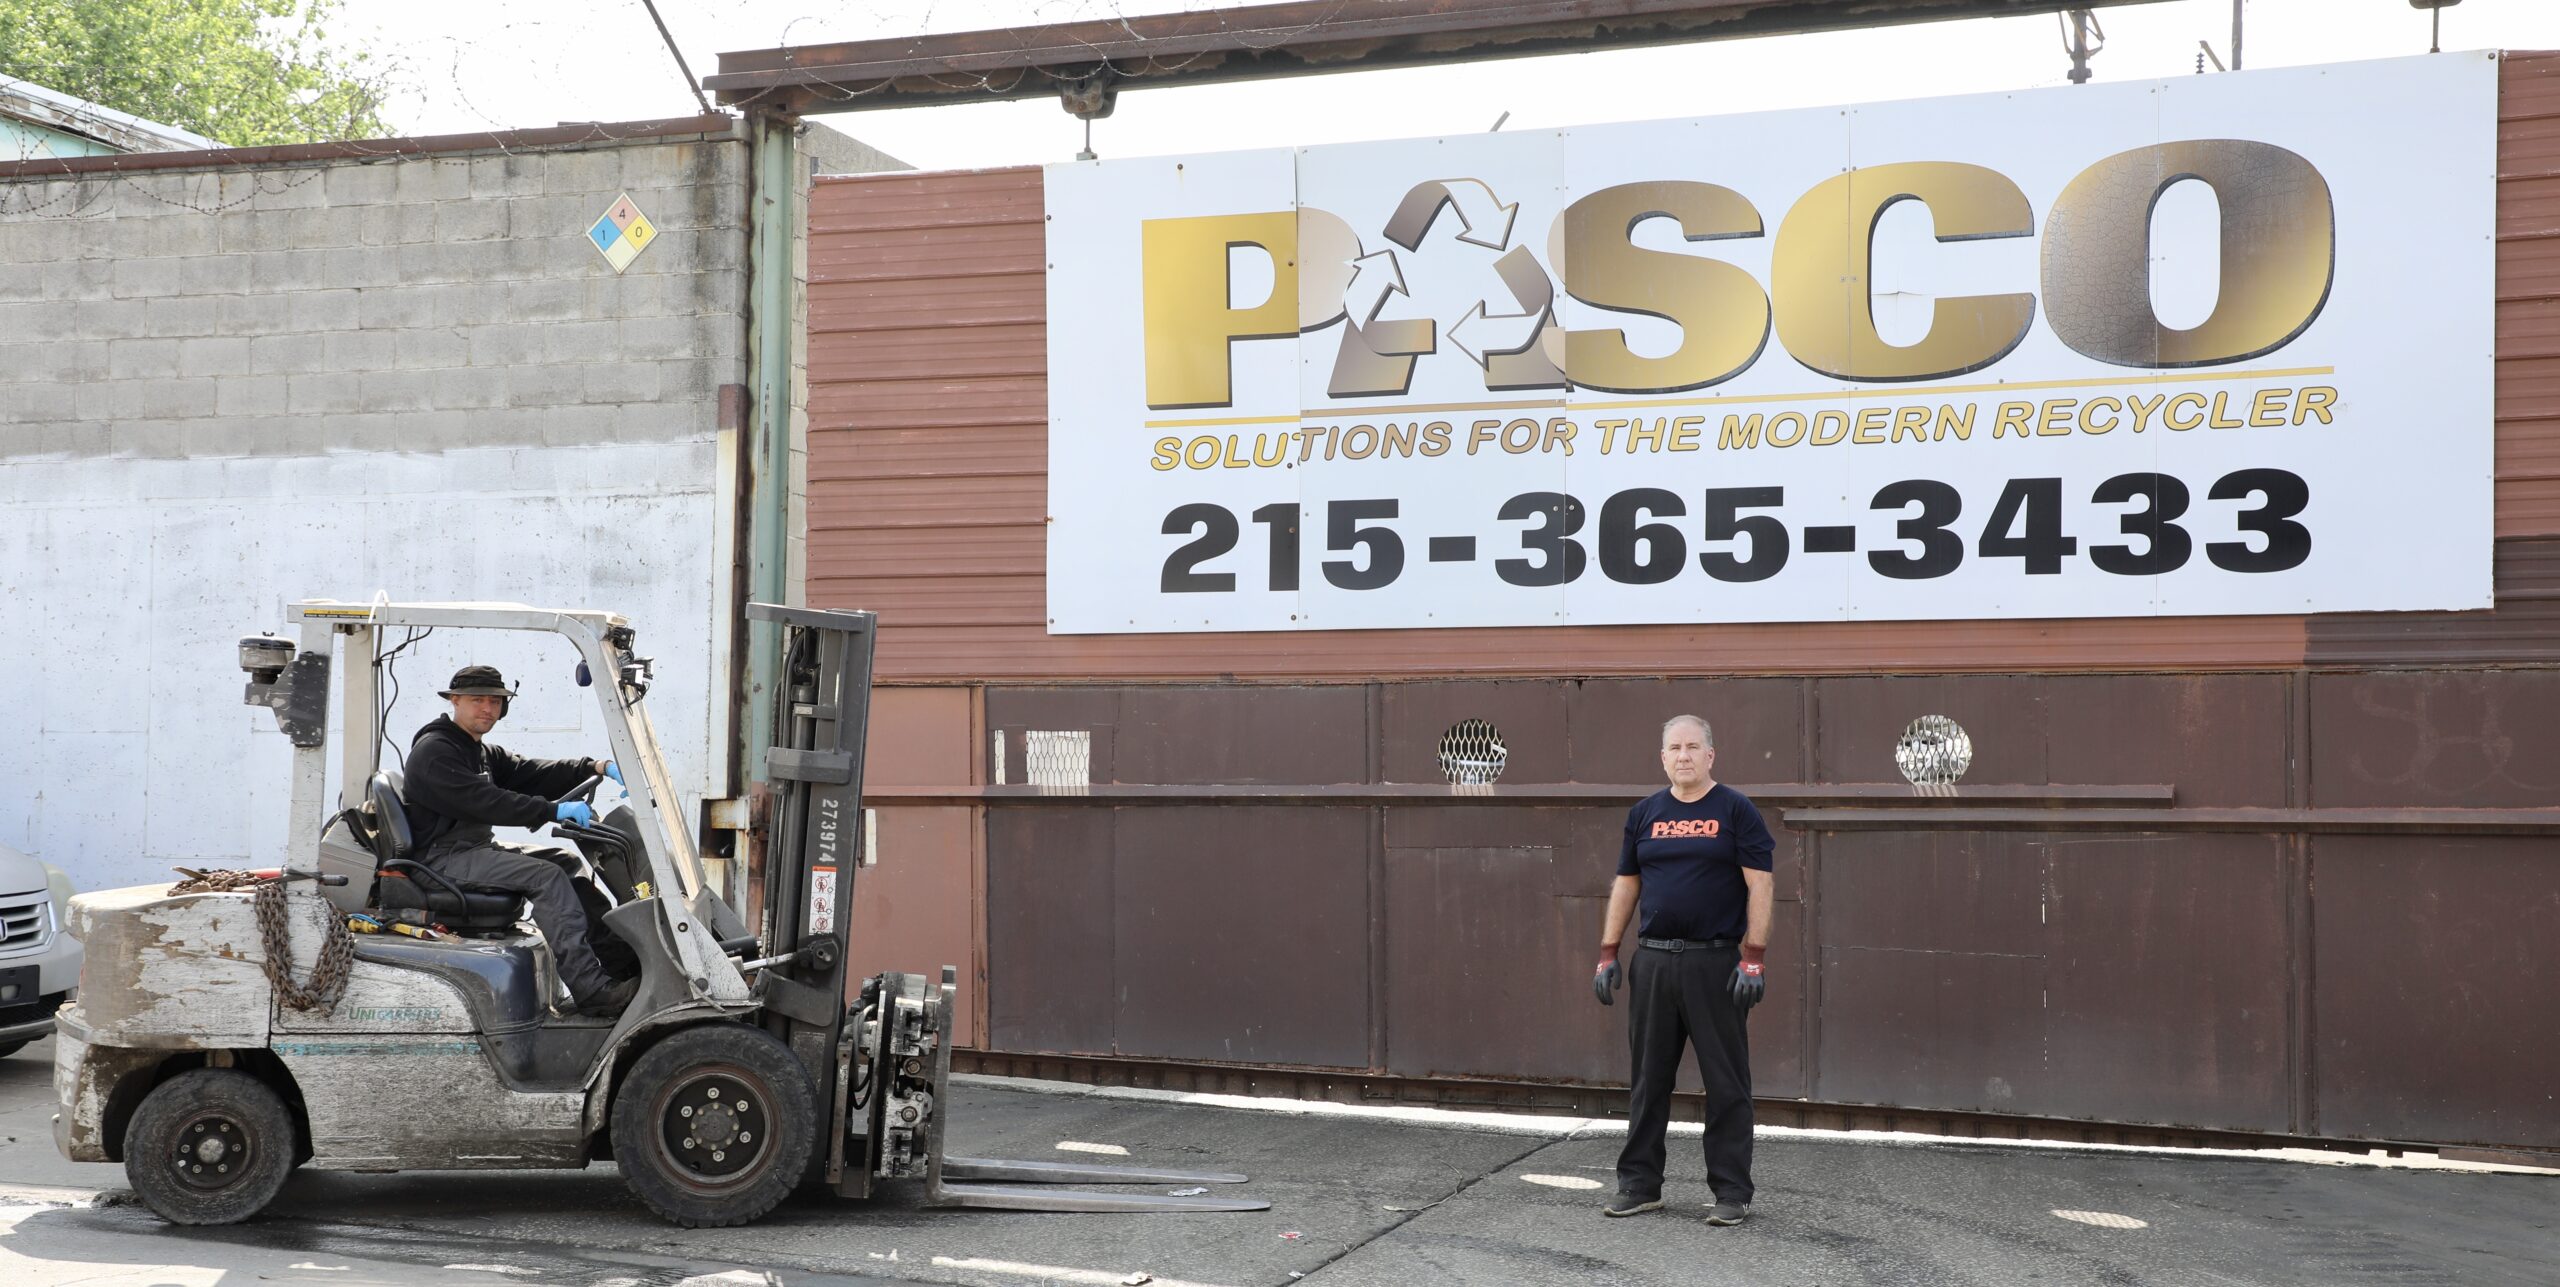 Pasco Owner standing in front of Pasco Signage